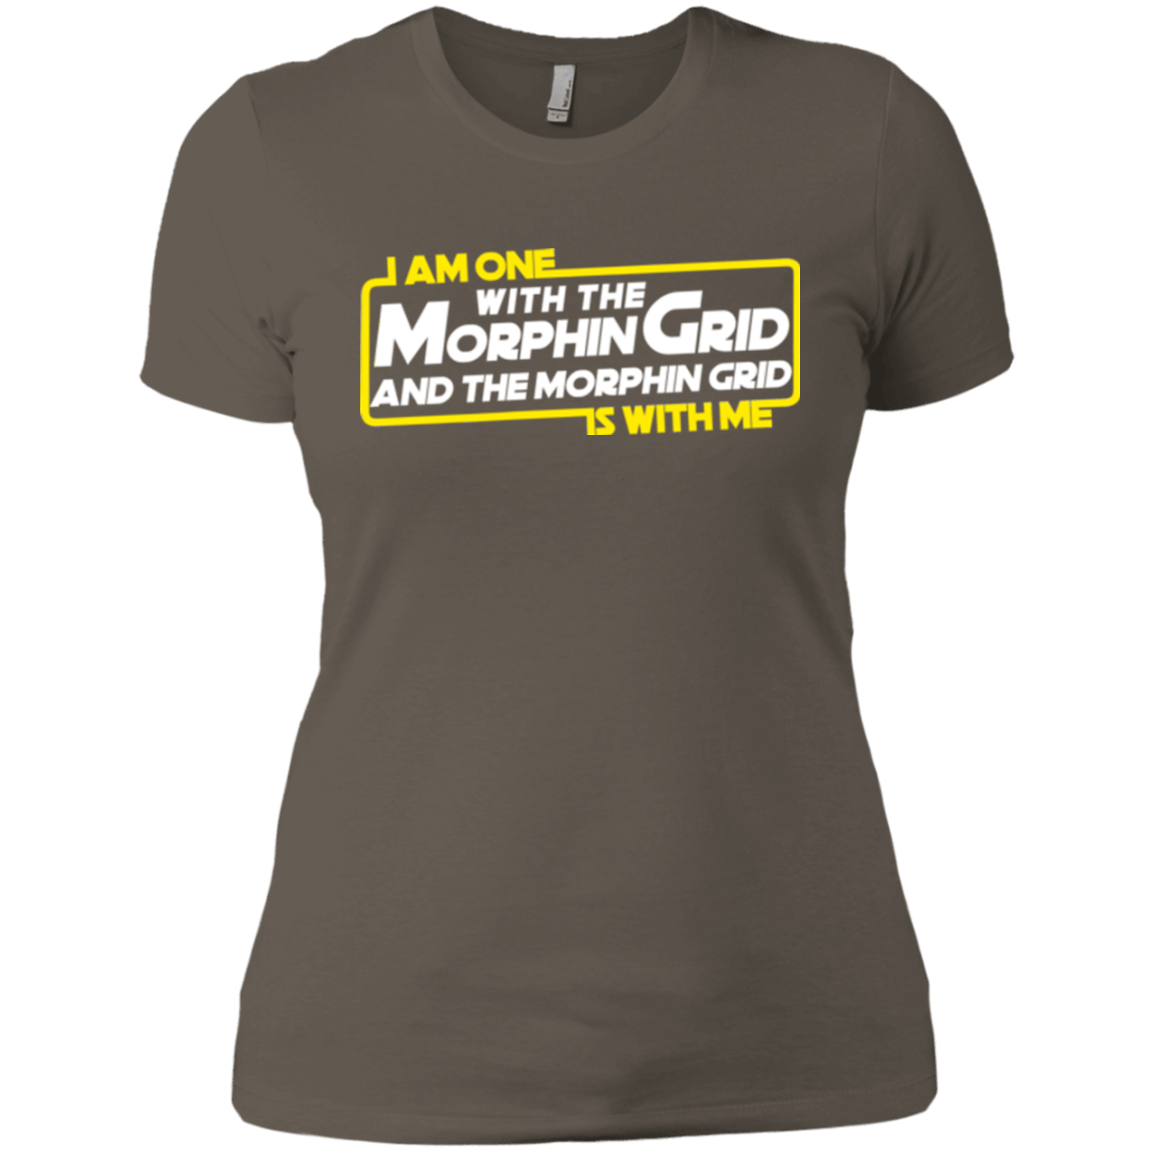 T-Shirts Warm Grey / X-Small One With The Women's Premium T-Shirt